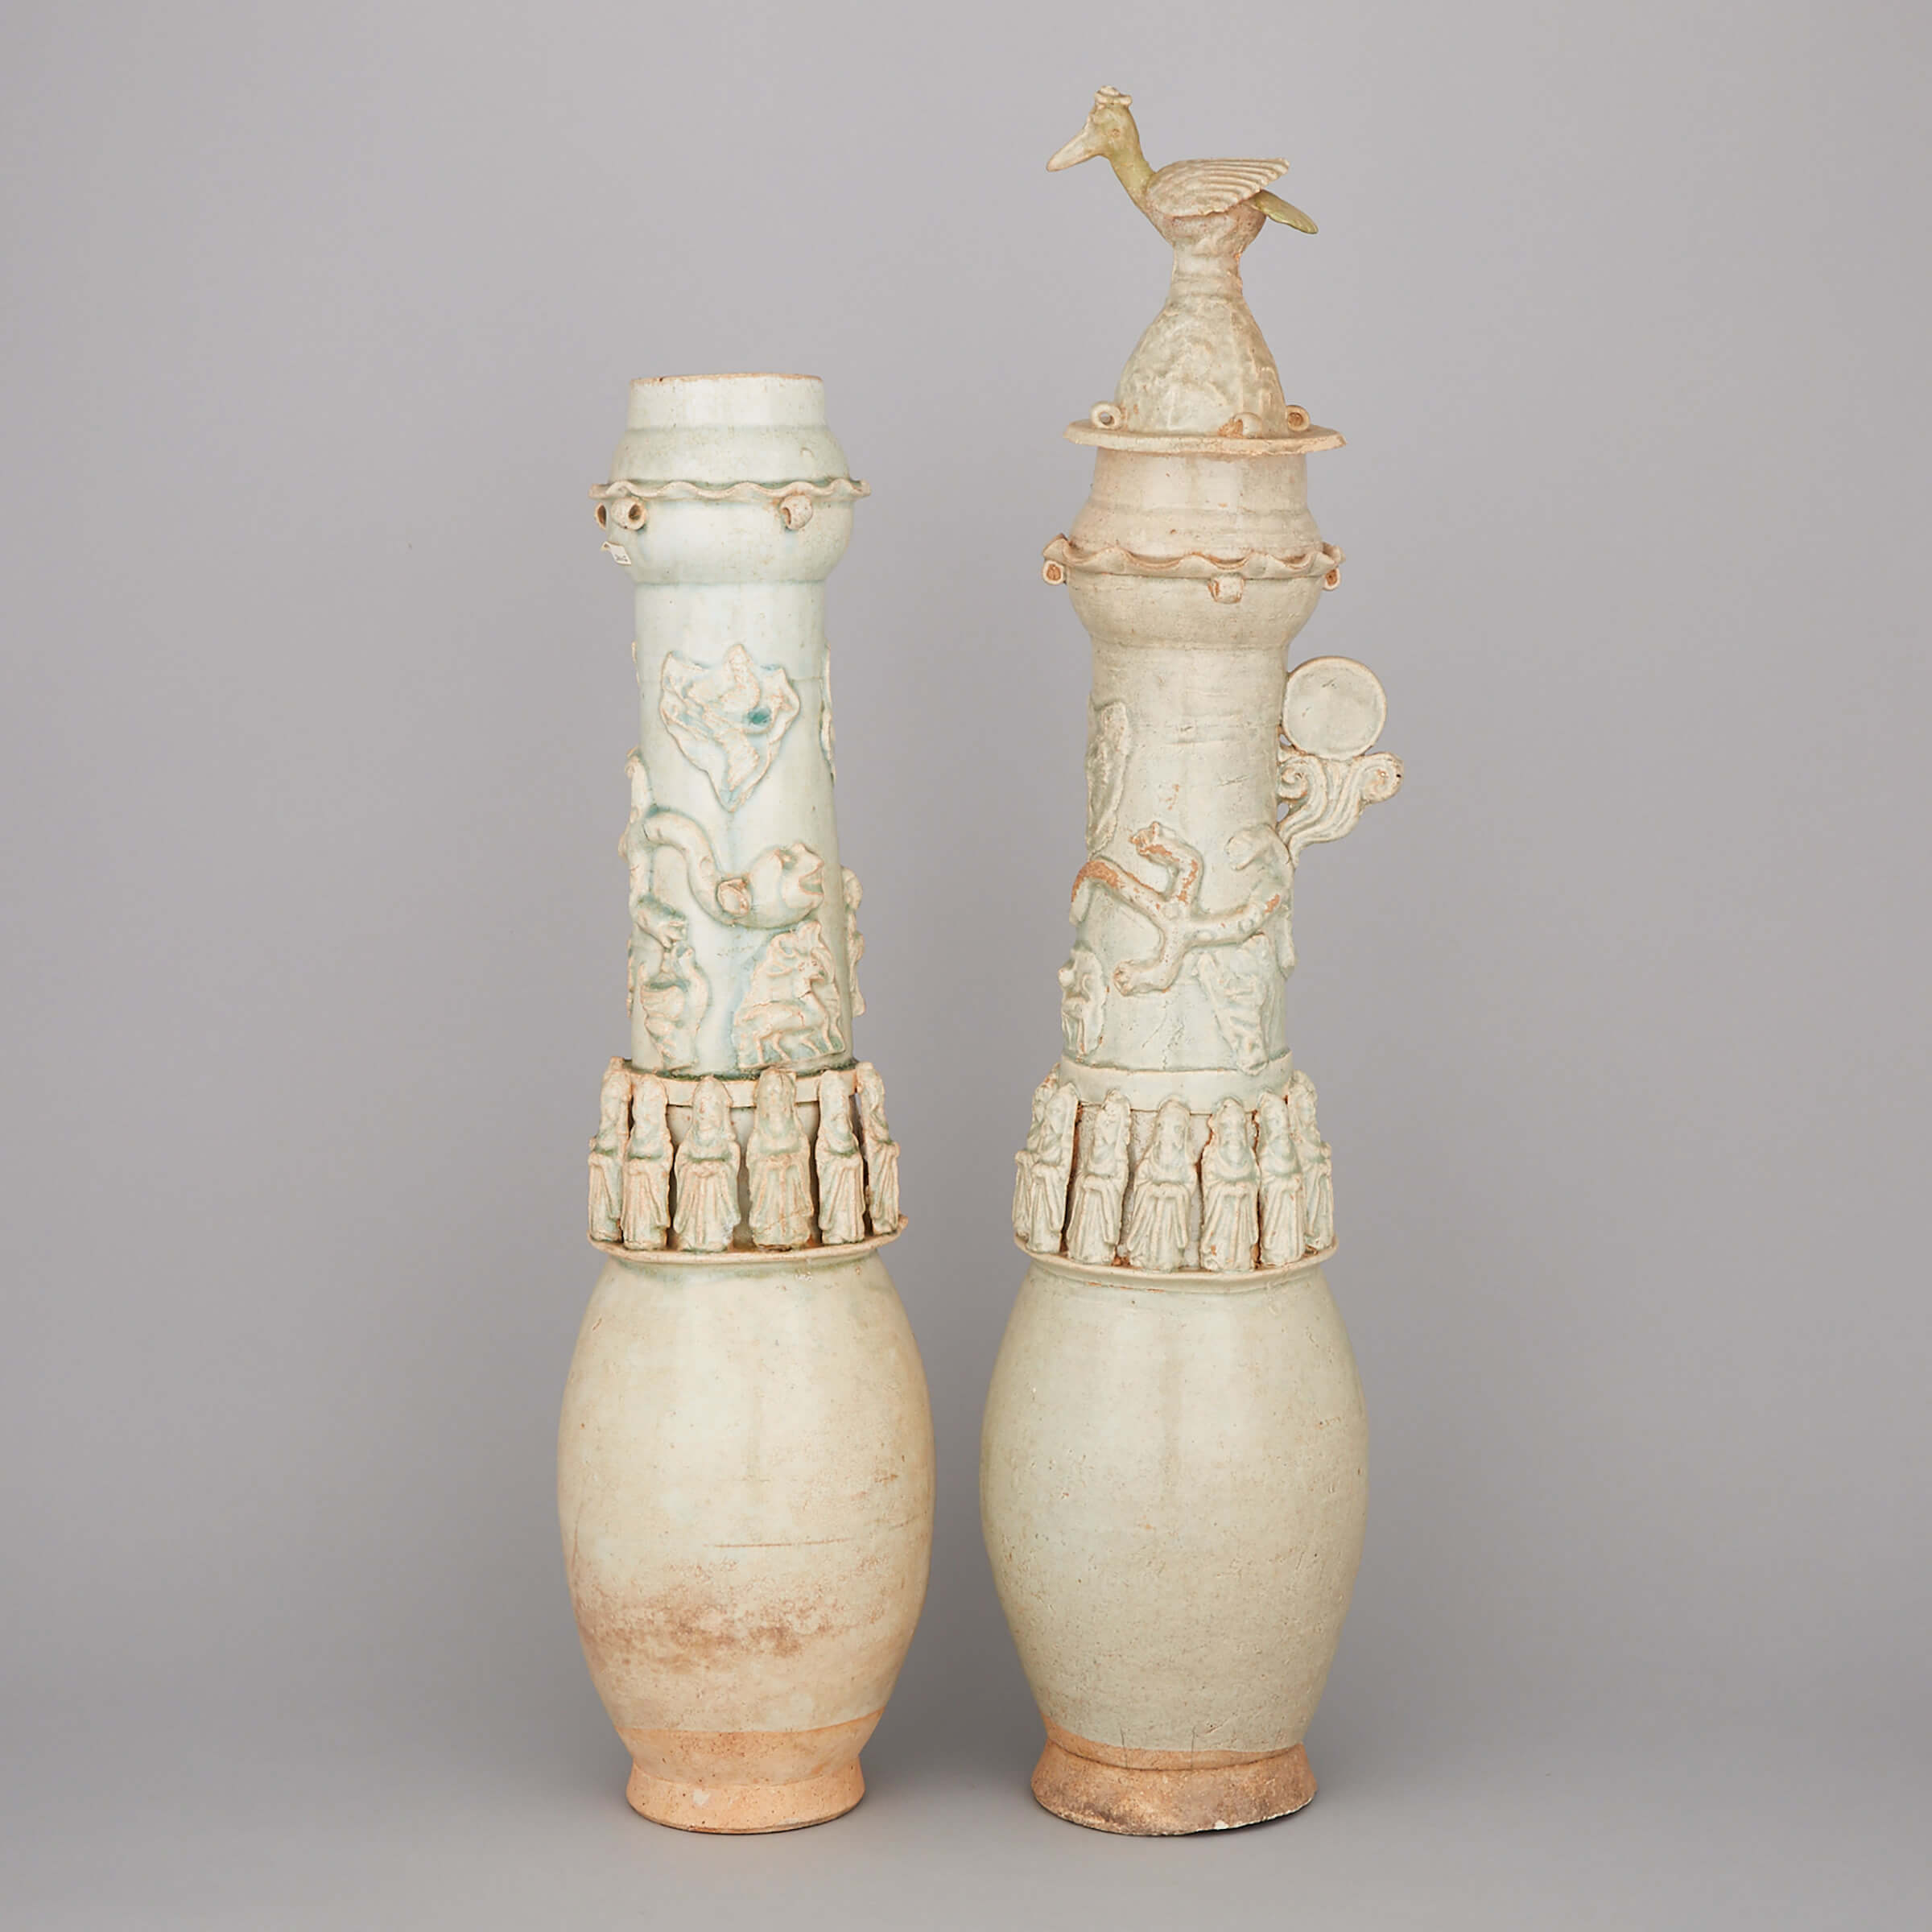 A Pair of Tall Chinese Yingqing Glazed Granary Jars, Song Dynasty 